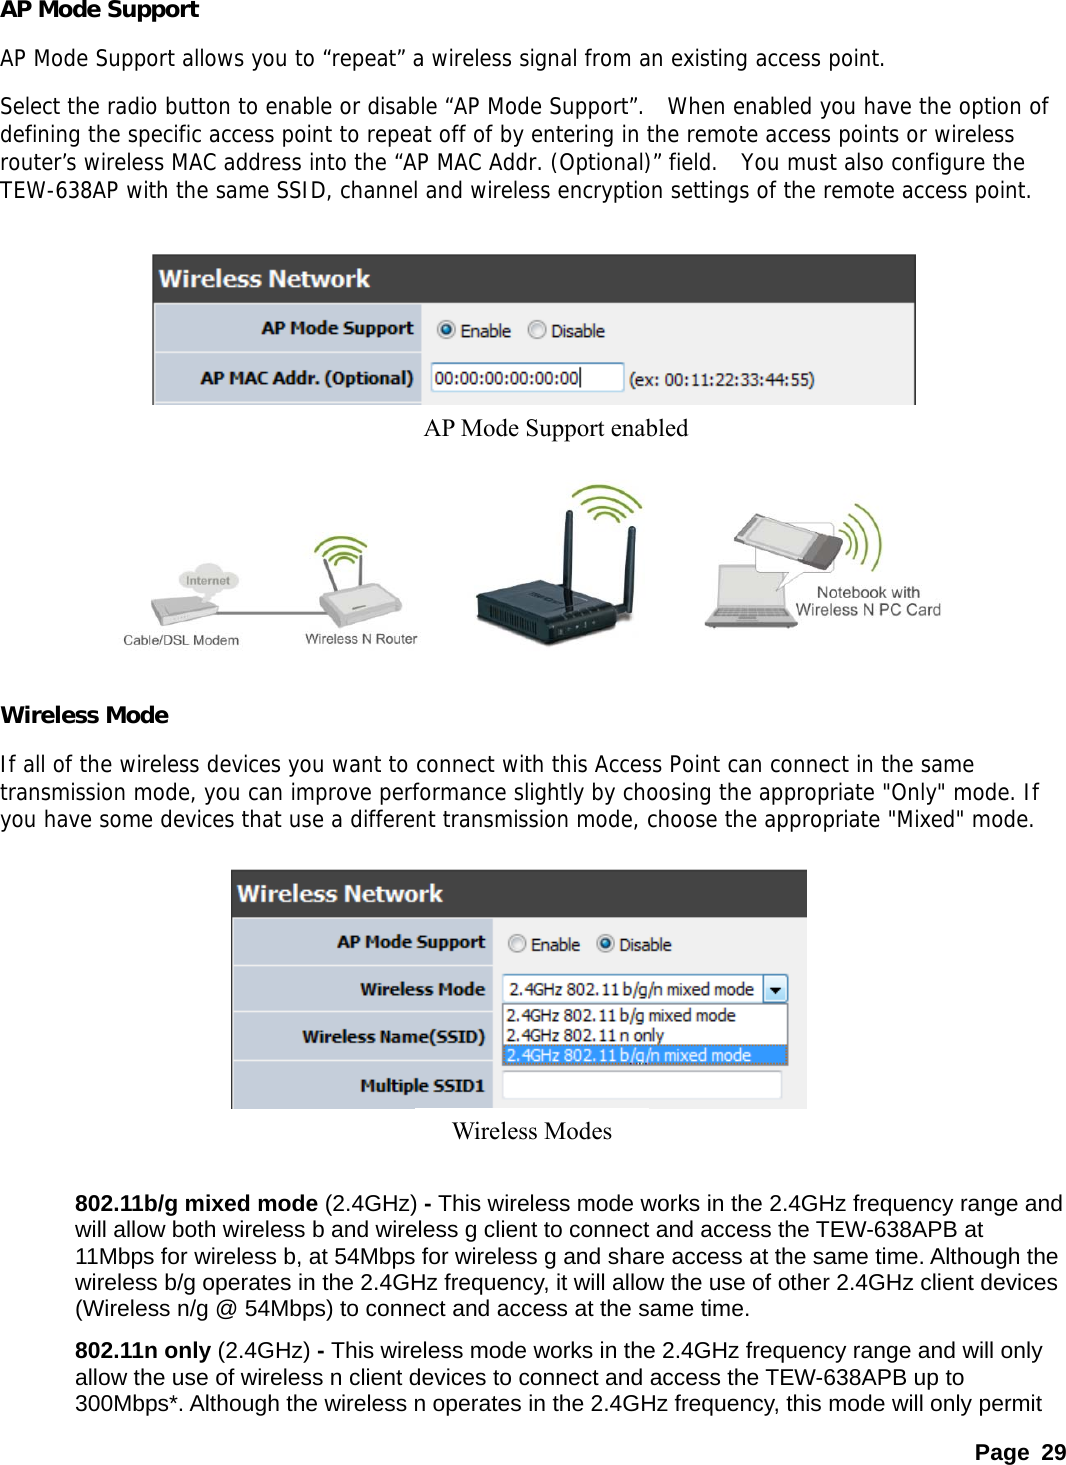 AP Mode Support   AP Mode Support allows you to “repeat” a wireless signal from an existing access point. Select the radio button to enable or disable “AP Mode Support”.  When enabled you have the option of defining the specific access point to repeat off of by entering in the remote access points or wireless router’s wireless MAC address into the “AP MAC Addr. (Optional)” field.  You must also configure the TEW-638AP with the same SSID, channel and wireless encryption settings of the remote access point.  AP Mode Support enabled       Wireless Mode If all of the wireless devices you want to connect with this Access Point can connect in the same transmission mode, you can improve performance slightly by choosing the appropriate &quot;Only&quot; mode. If you have some devices that use a different transmission mode, choose the appropriate &quot;Mixed&quot; mode.   Wireless Modes       802.11b/g mixed mode (2.4GHz) - This wireless mode works in the 2.4GHz frequency range and will allow both wireless b and wireless g client to connect and access the TEW-638APB at 11Mbps for wireless b, at 54Mbps for wireless g and share access at the same time. Although the wireless b/g operates in the 2.4GHz frequency, it will allow the use of other 2.4GHz client devices (Wireless n/g @ 54Mbps) to connect and access at the same time. 802.11n only (2.4GHz) - This wireless mode works in the 2.4GHz frequency range and will only allow the use of wireless n client devices to connect and access the TEW-638APB up to 300Mbps*. Although the wireless n operates in the 2.4GHz frequency, this mode will only permit Page 29 